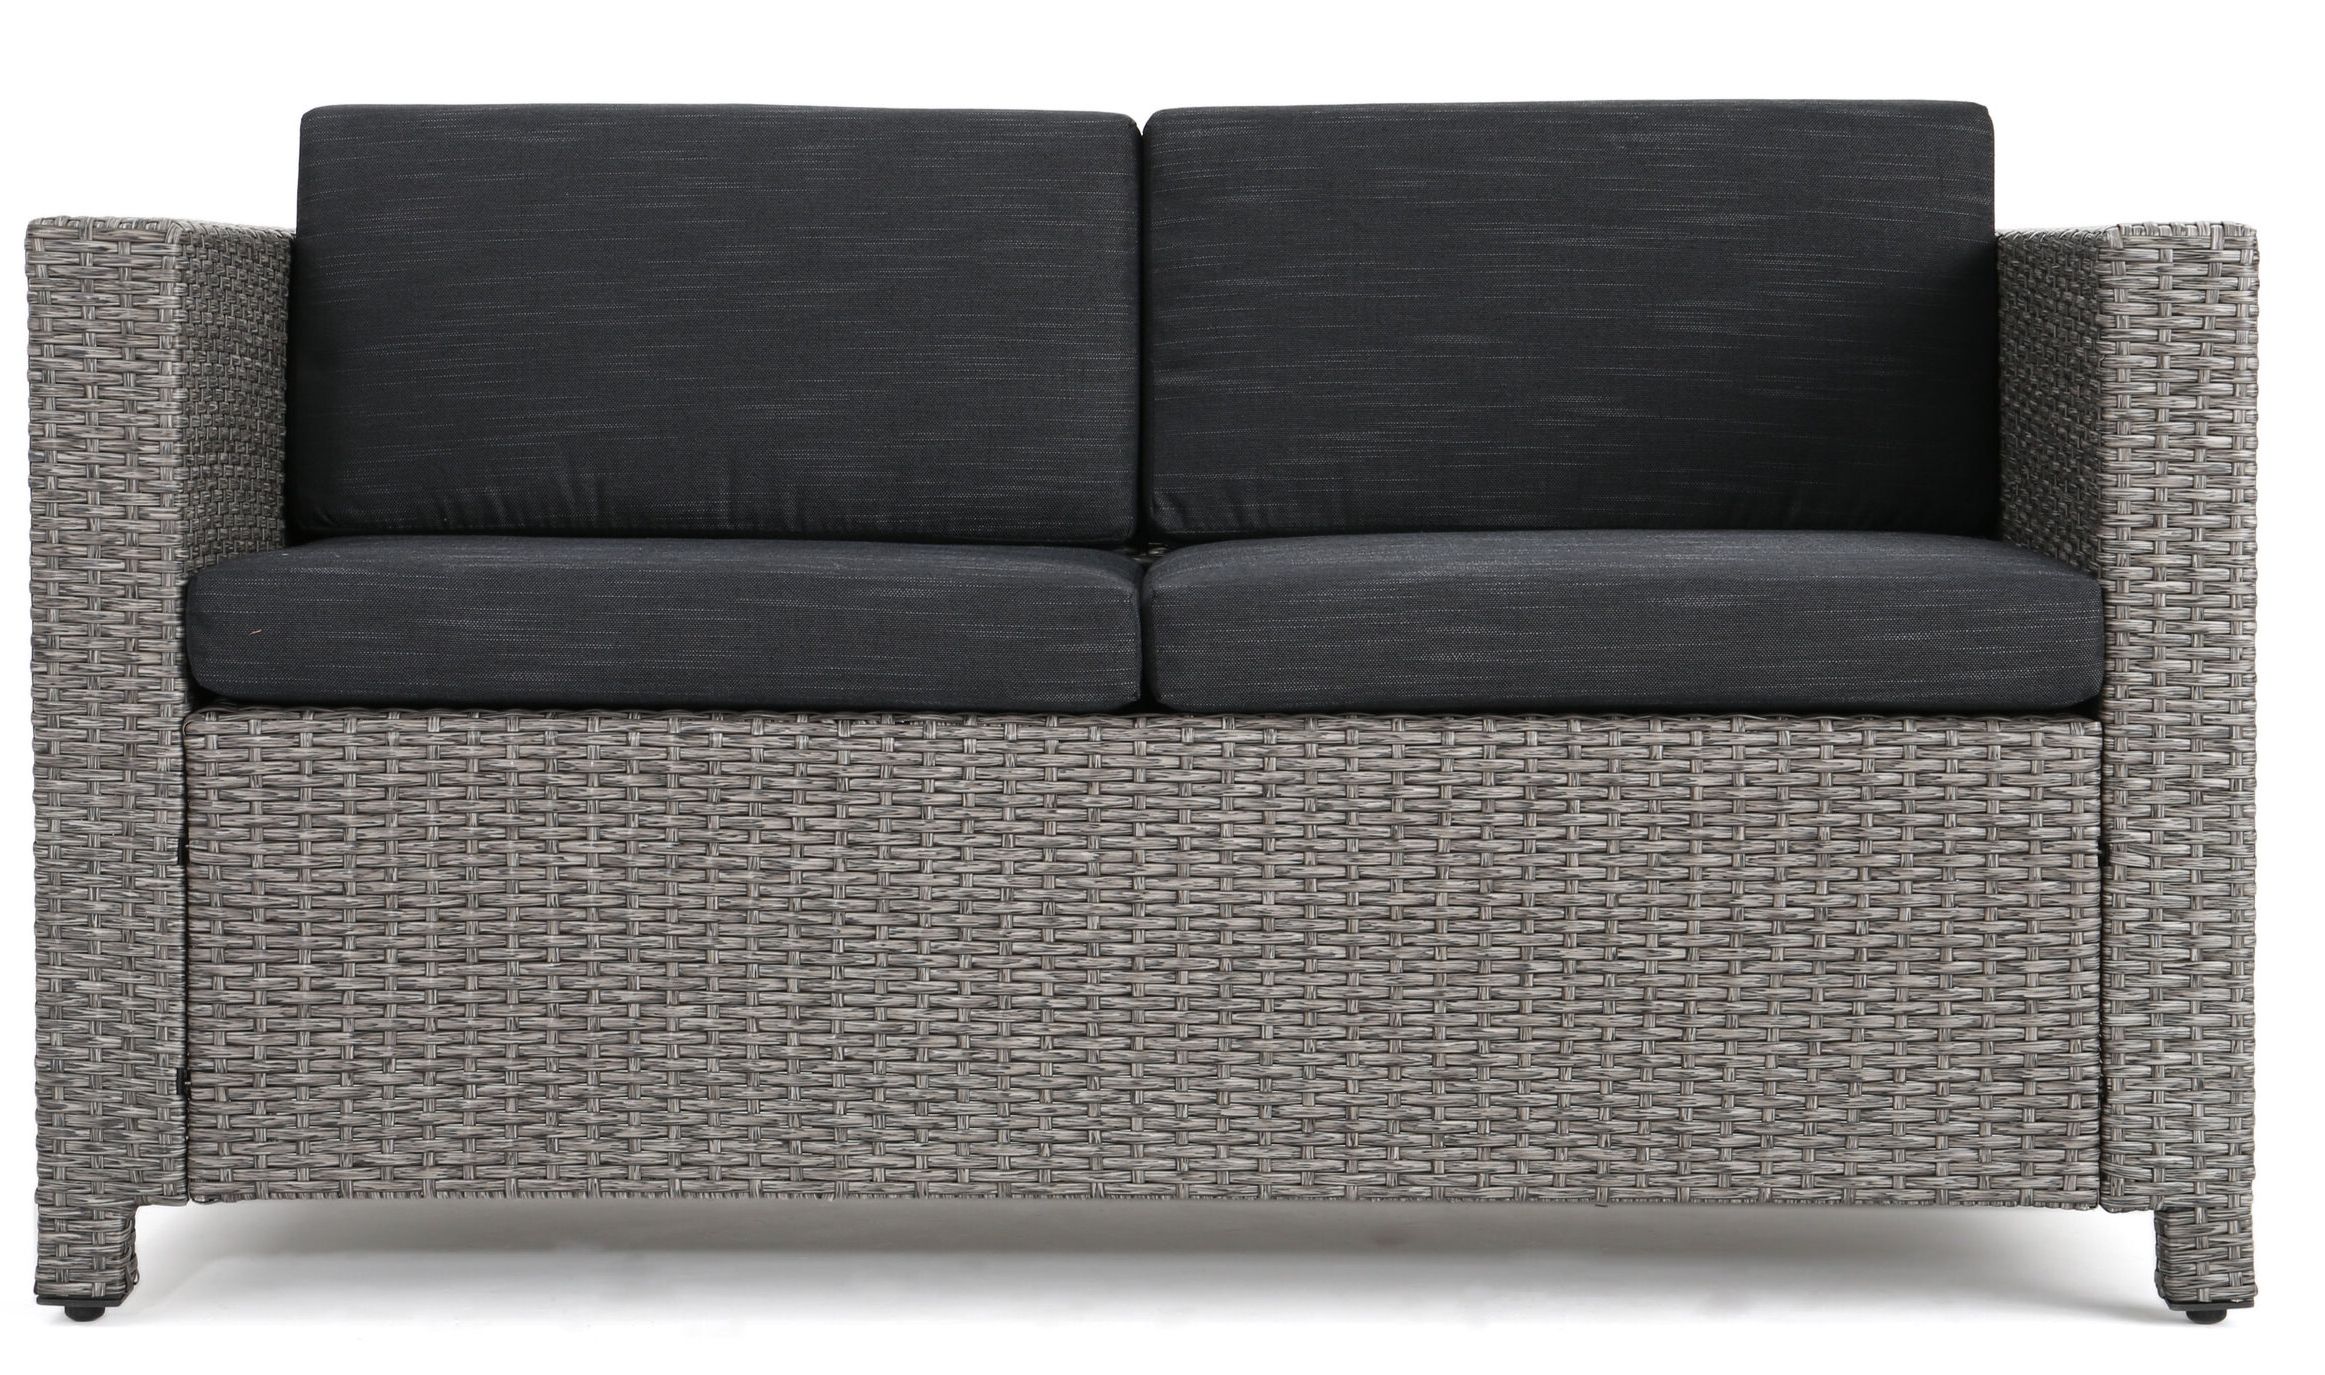 Furst Outdoor Loveseats With Cushions Intended For Well Known Furst Outdoor Loveseat With Cushions (View 1 of 25)